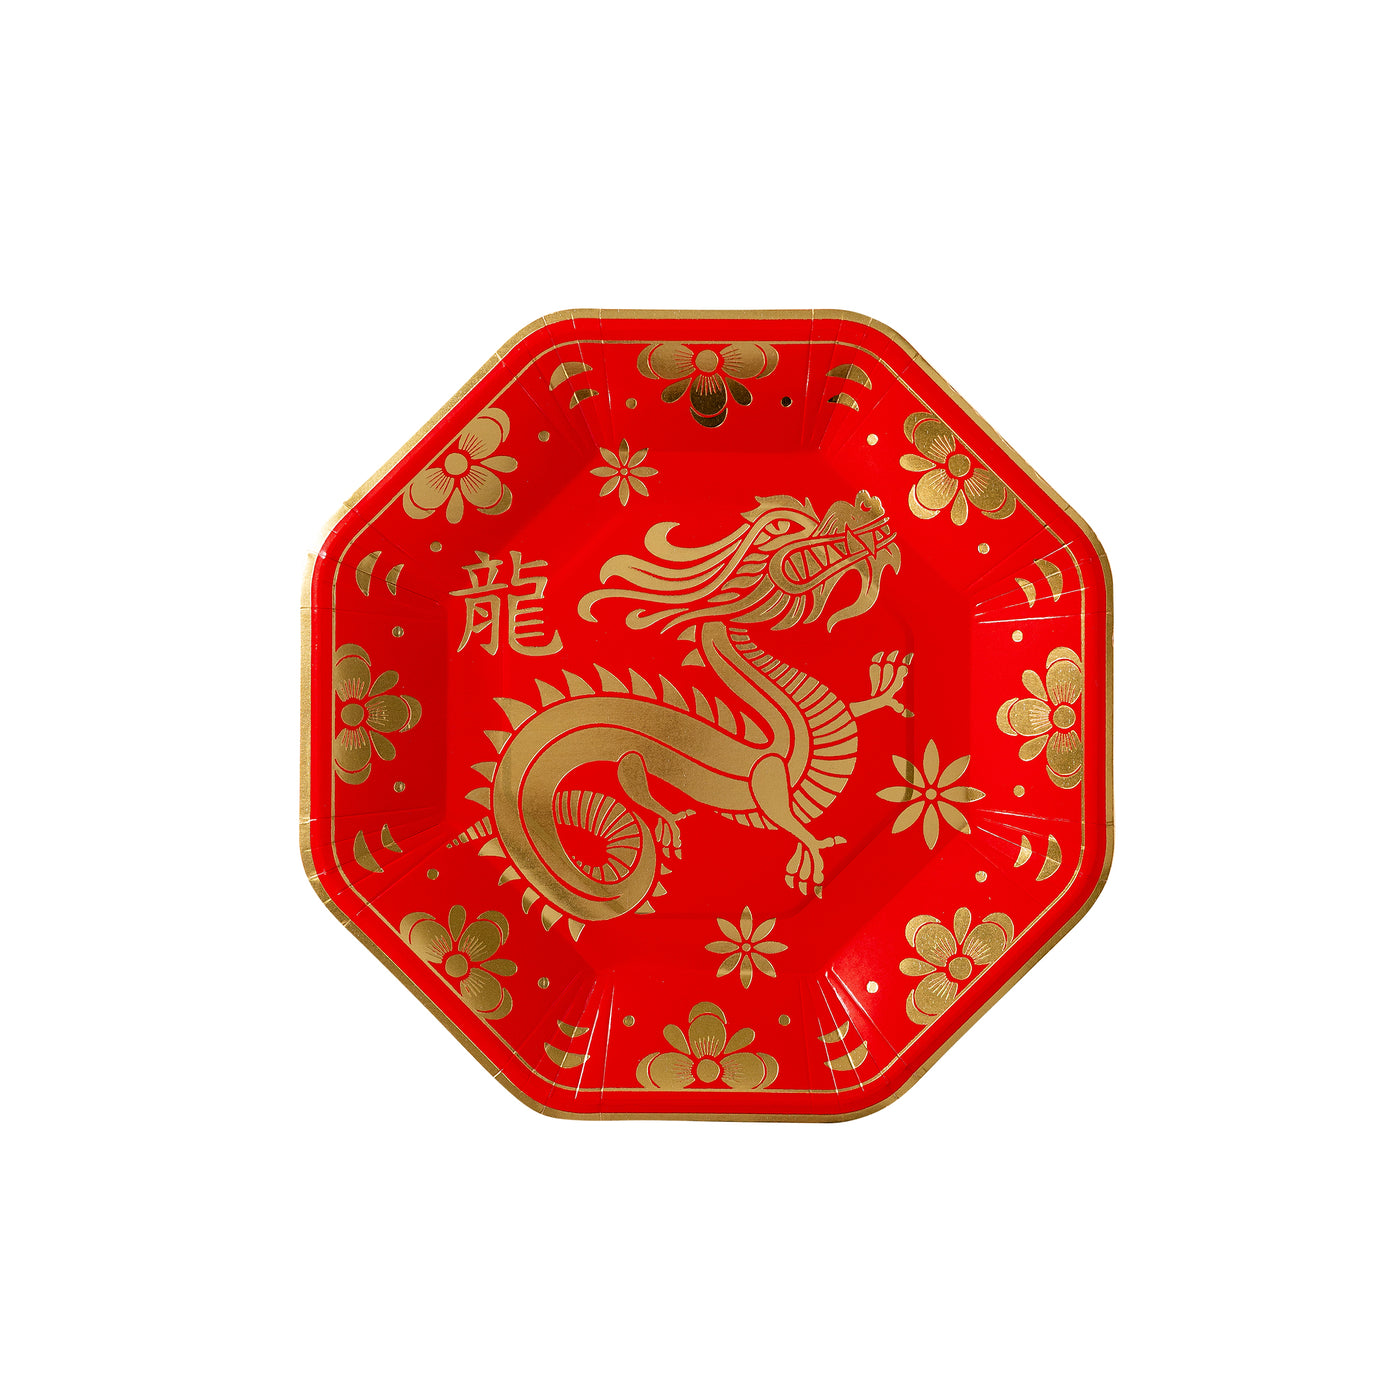 PLNY192 - Lunar New Year Year of the Dragon Paper Plate